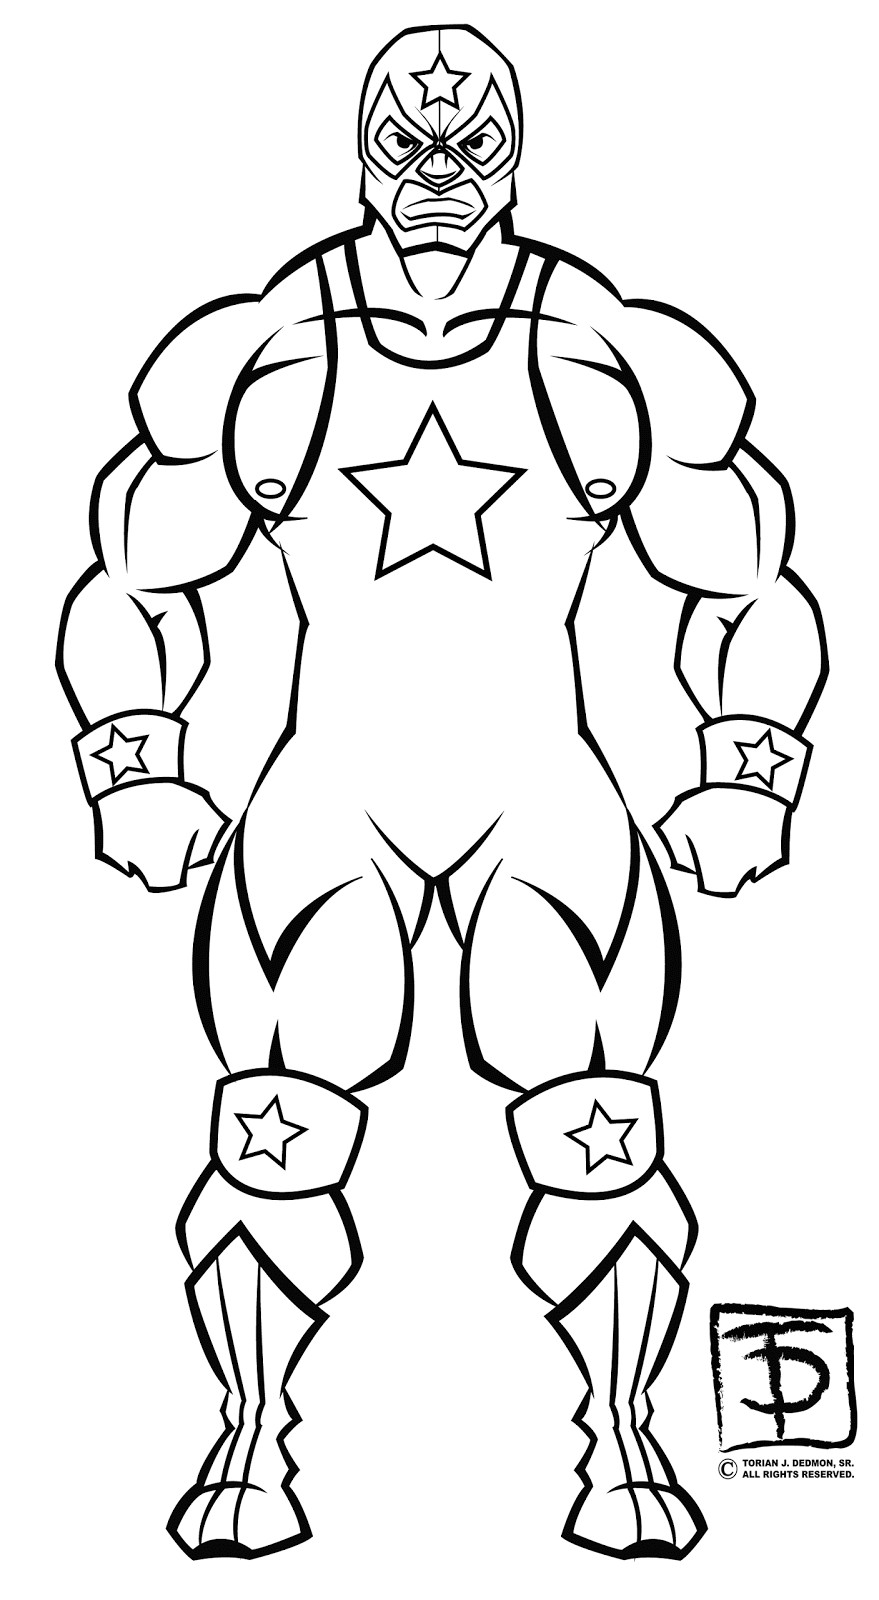 Wwe Printable Coloring Pages
 WWE Coloring Pages of Rey Mysterio